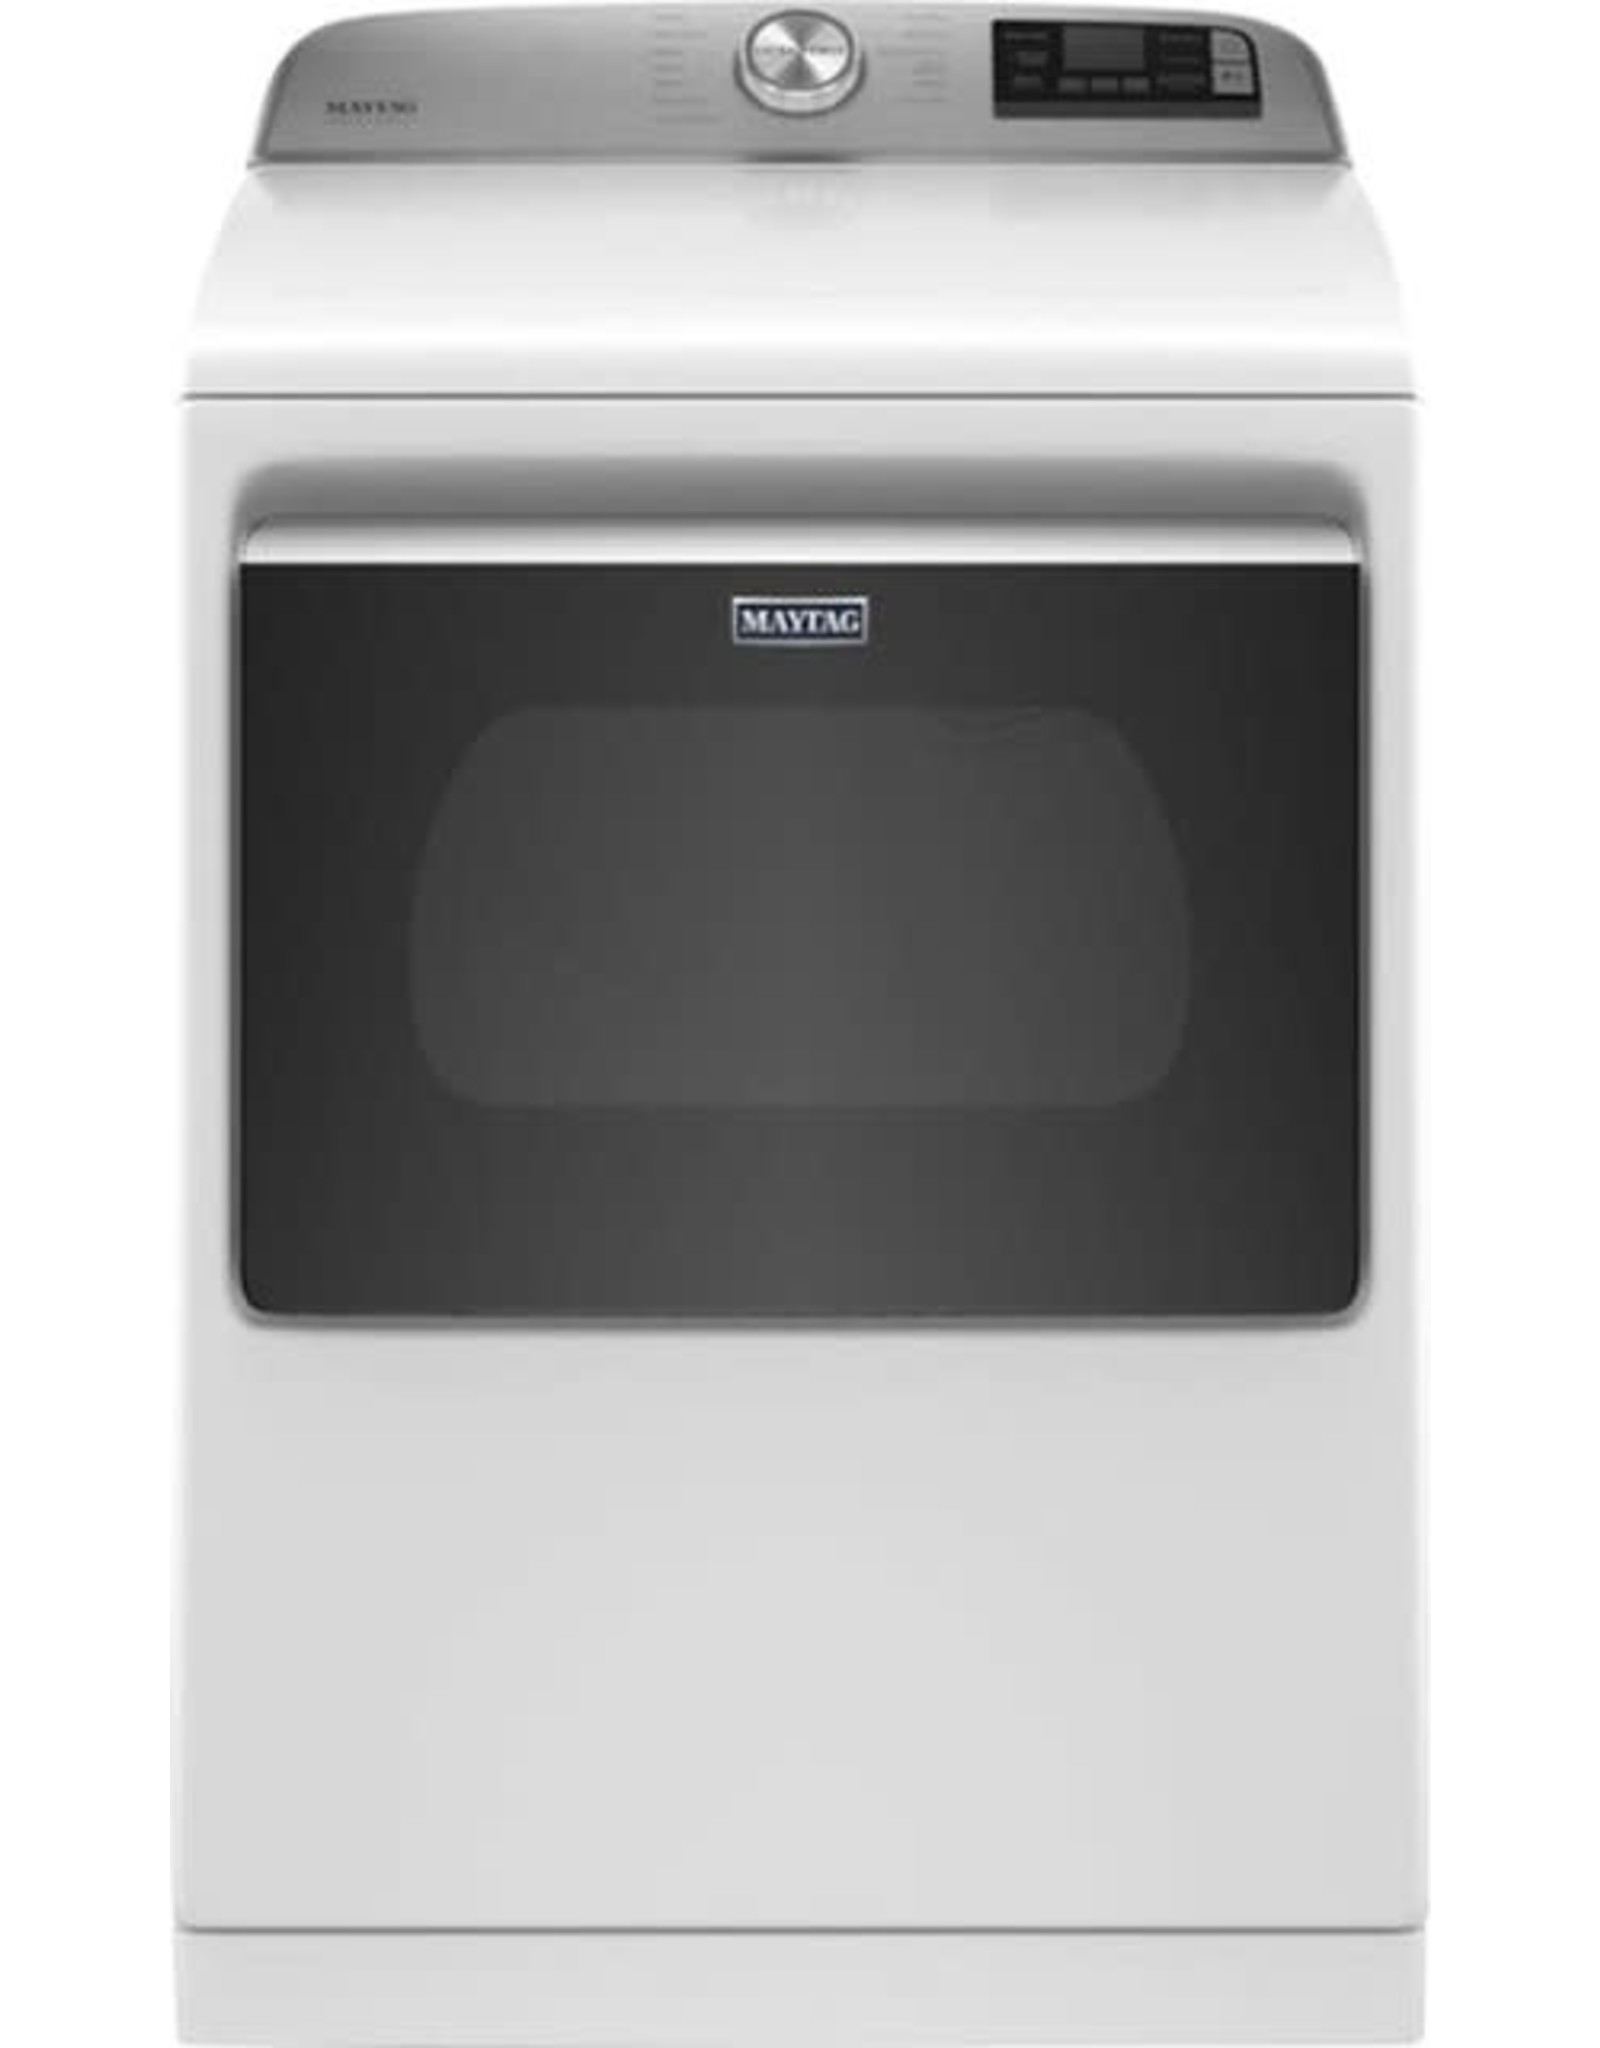 MAYTAG MED7230HW3 SMART TOP LOAD ELECTRIC DRYER WITH EXTRA POWER BUTTON - 7.4 CU. FT.